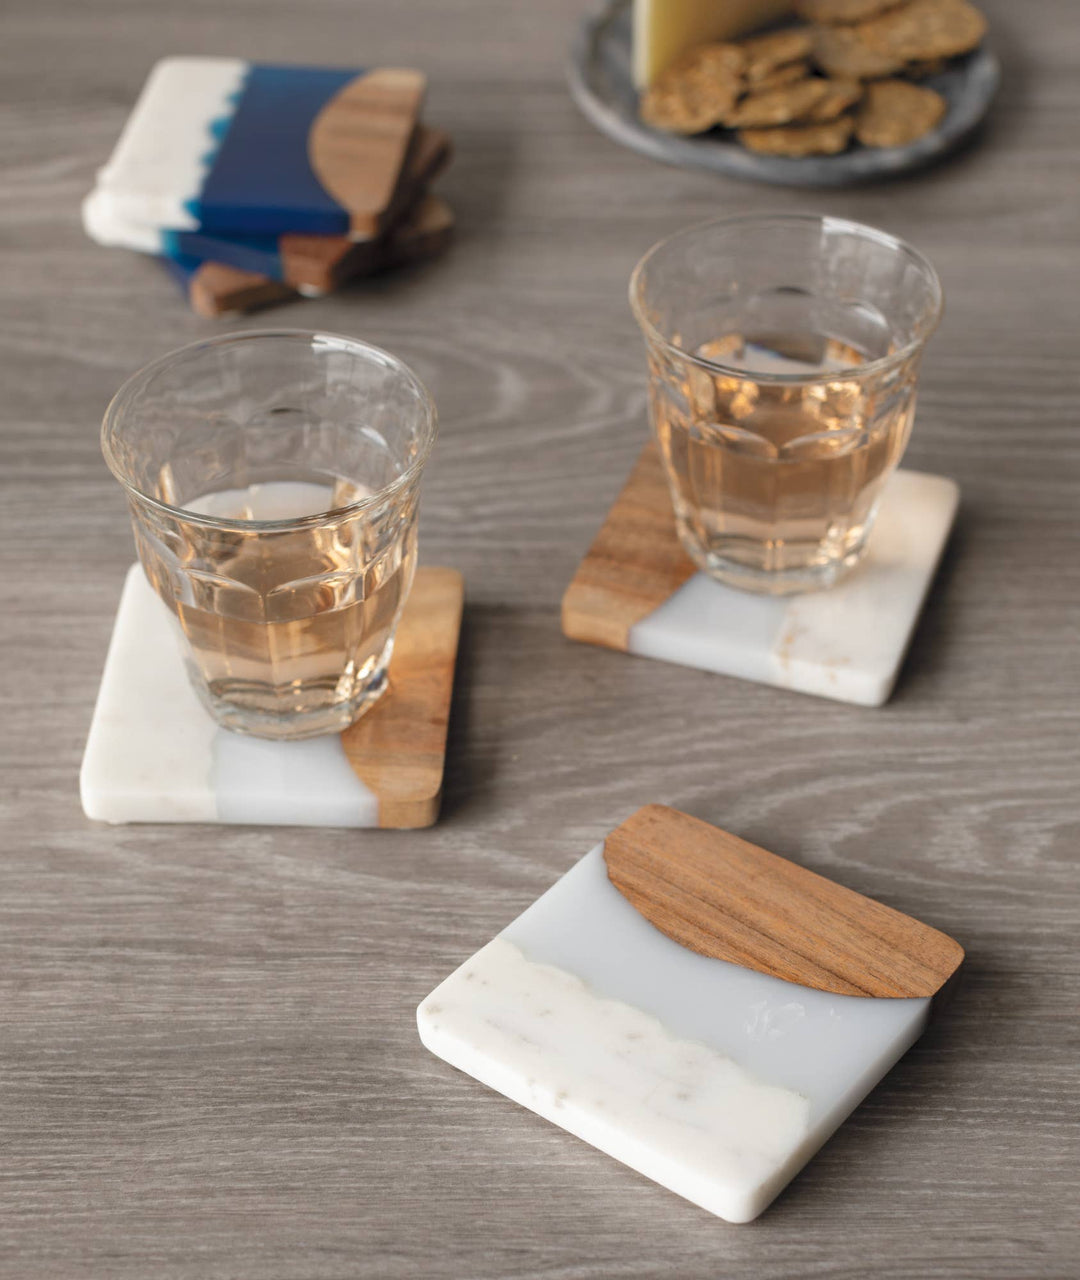 Marble and Wood Coasters Set of 4 - Merry Piglets